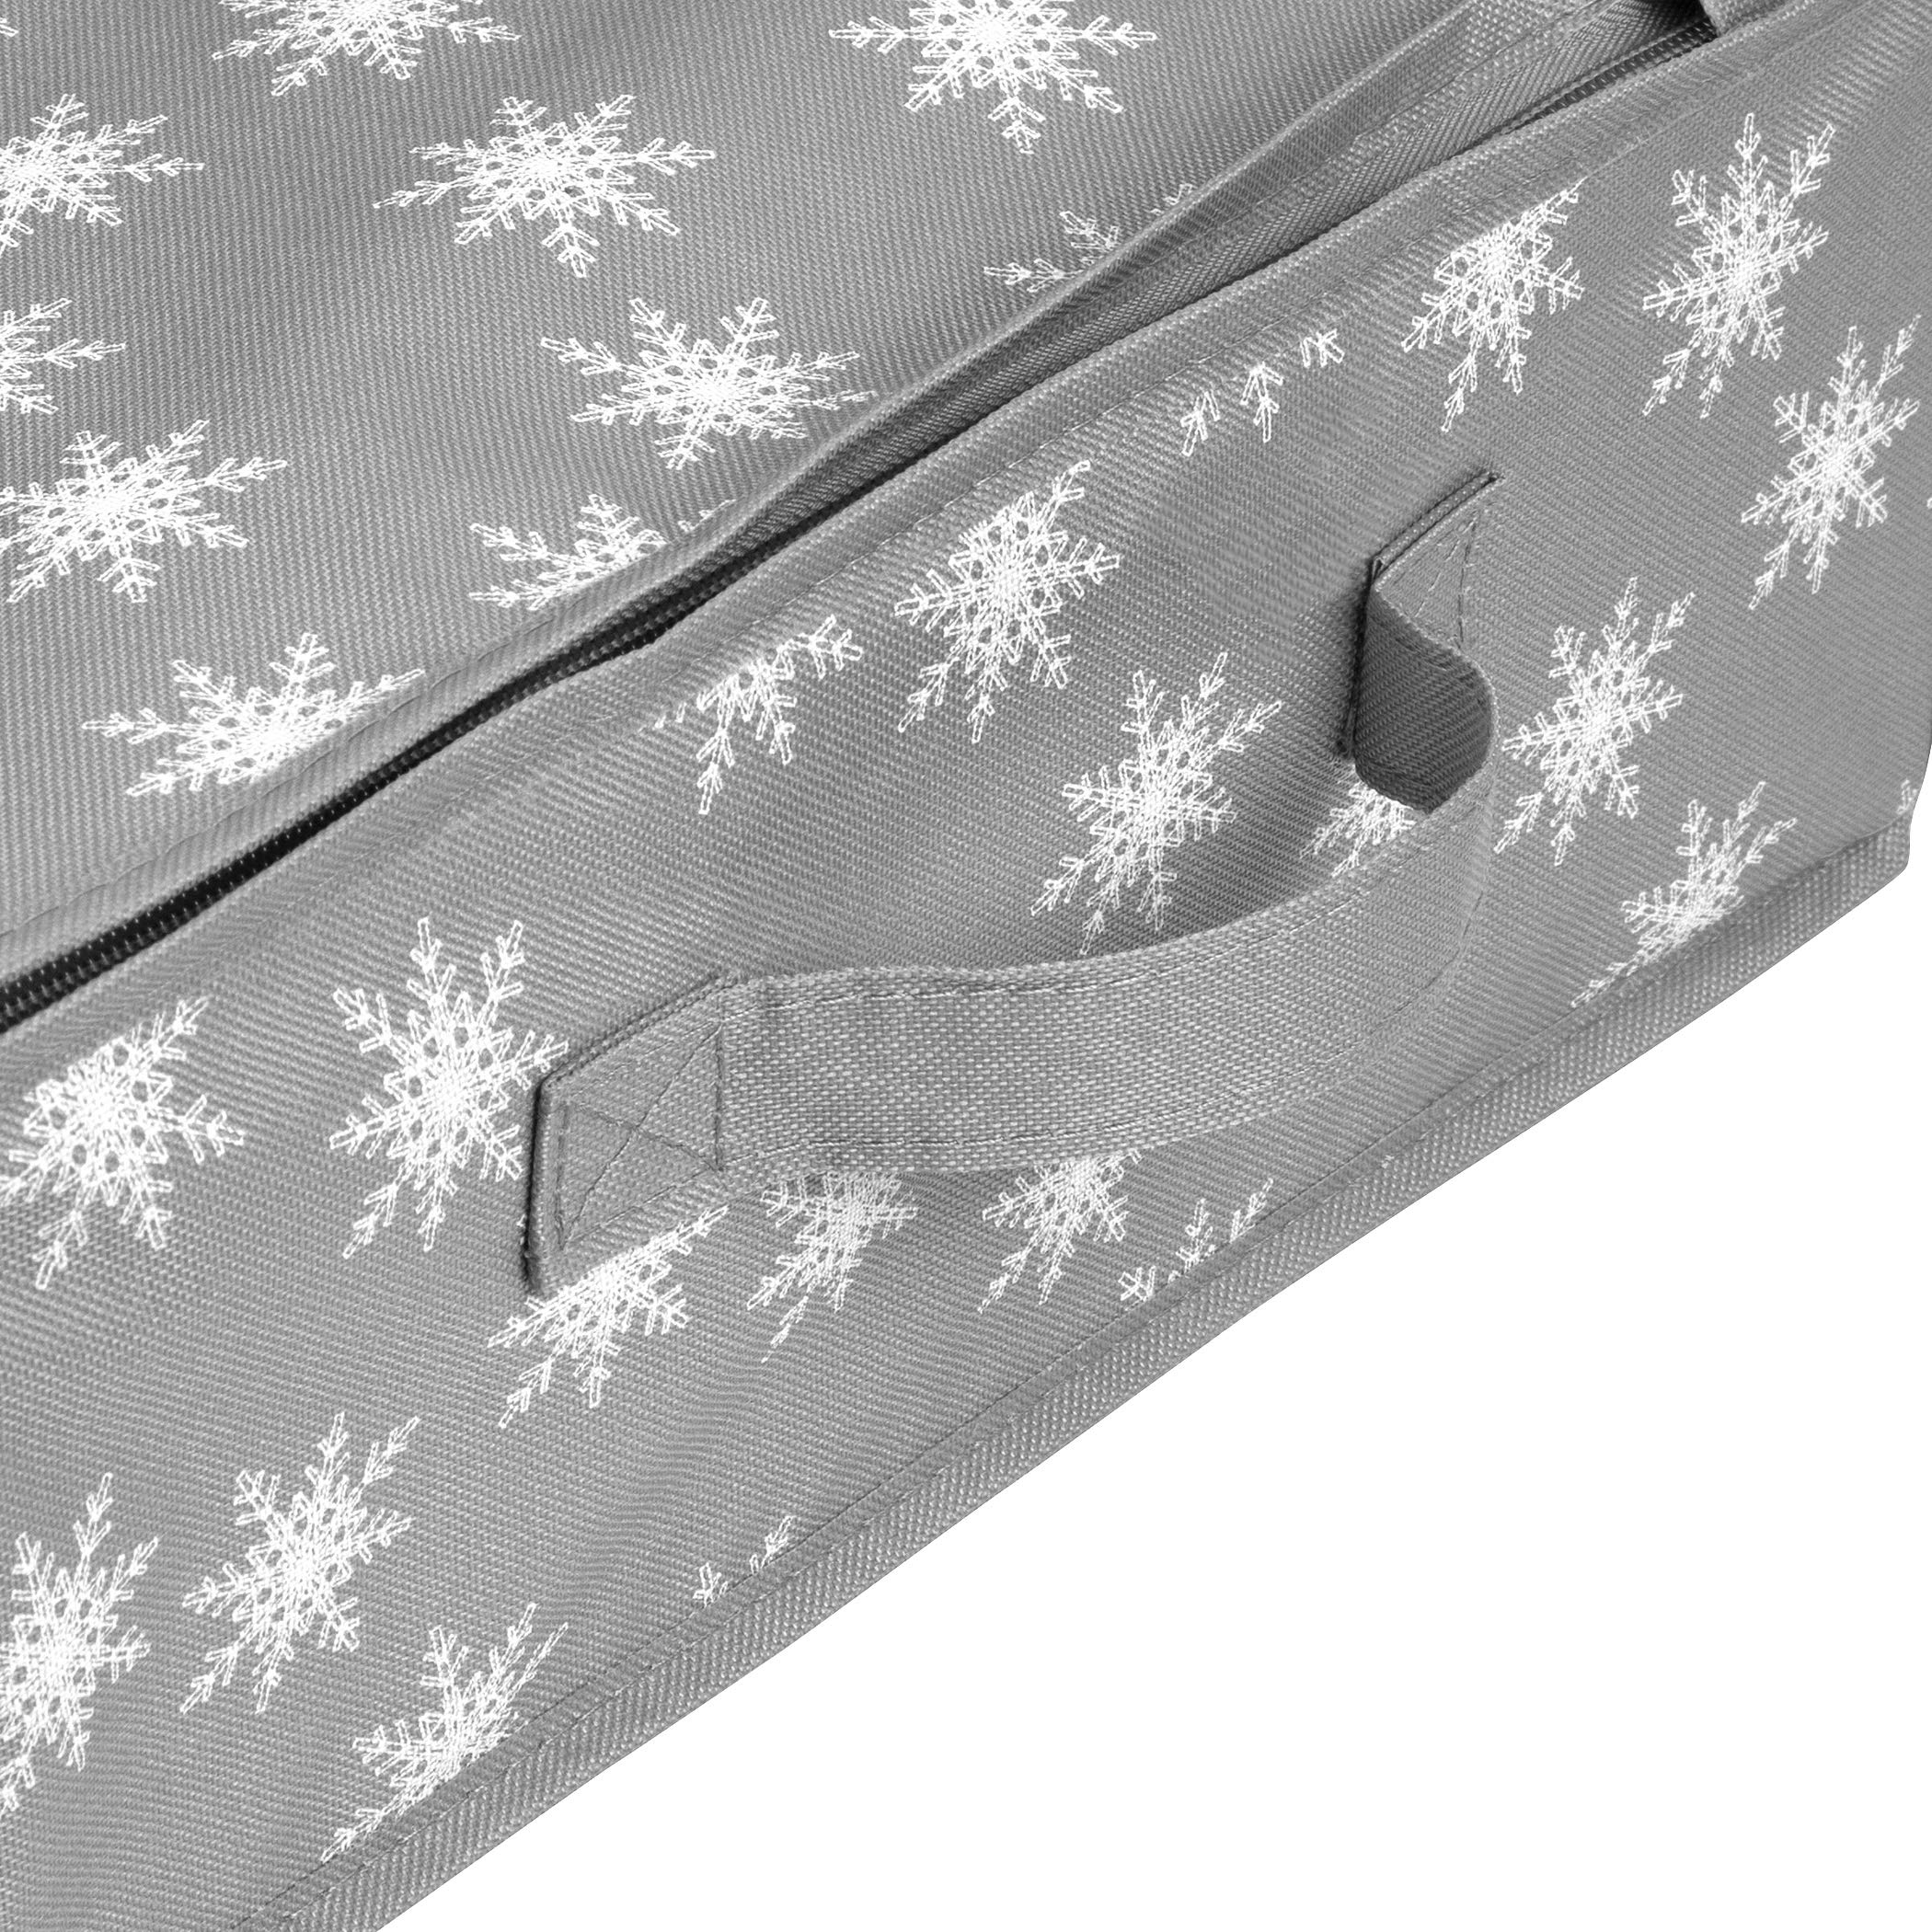 Wrapping Paper Storage Container – Fits up to 27 Rolls 1 3/8” Diam. - Underbed Gift Wrap Organizer Bags, Wrapping Paper Rolls, Ribbon, and Bows - Under Bed- Durable Material 600D - Up to 40